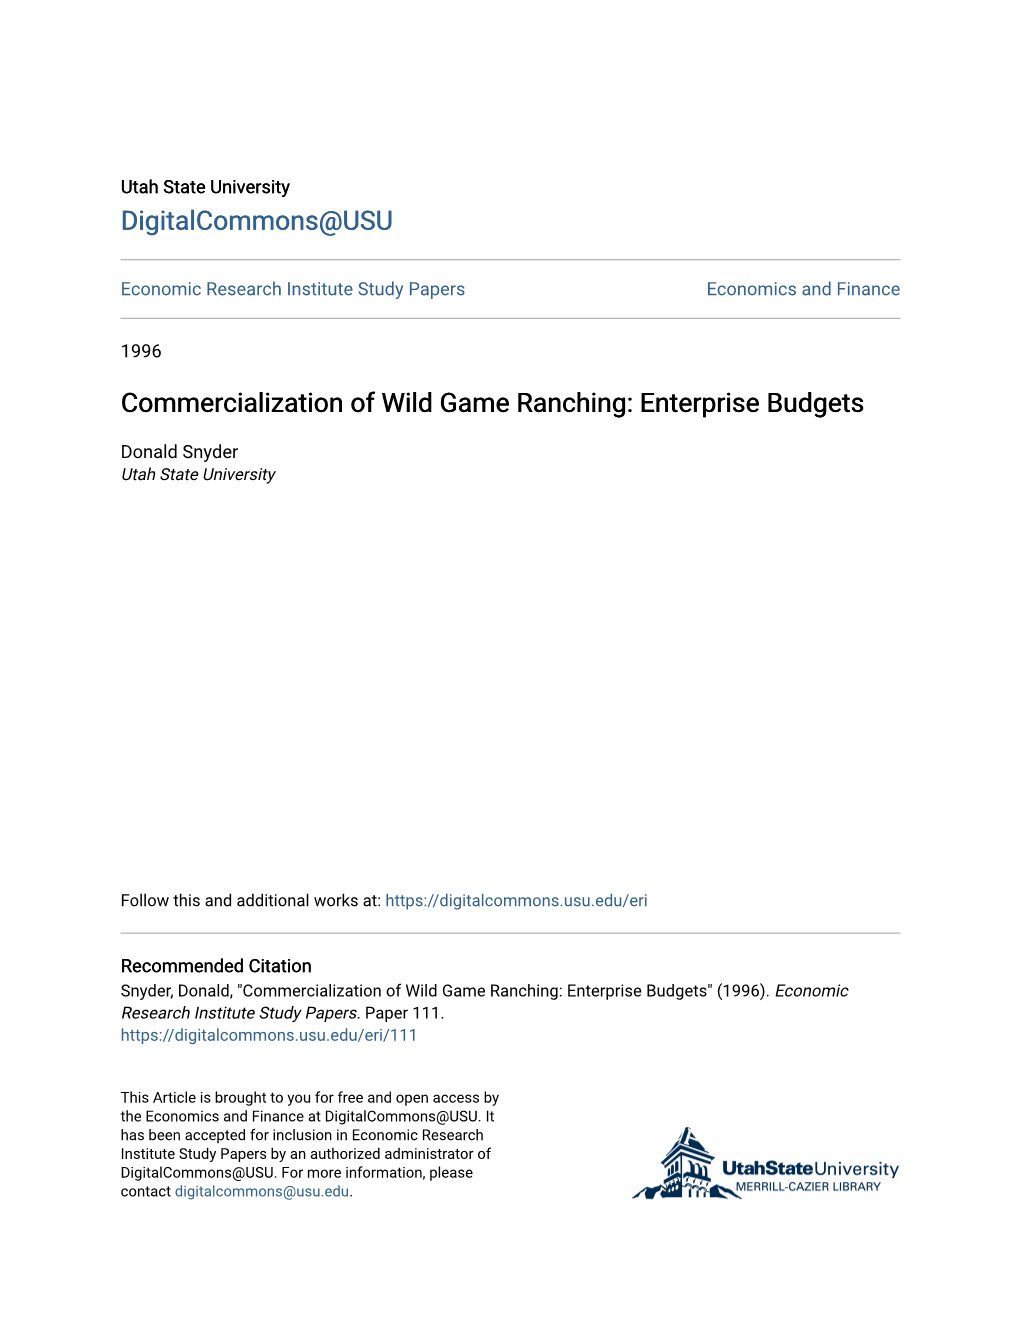 Commercialization of Wild Game Ranching: Enterprise Budgets